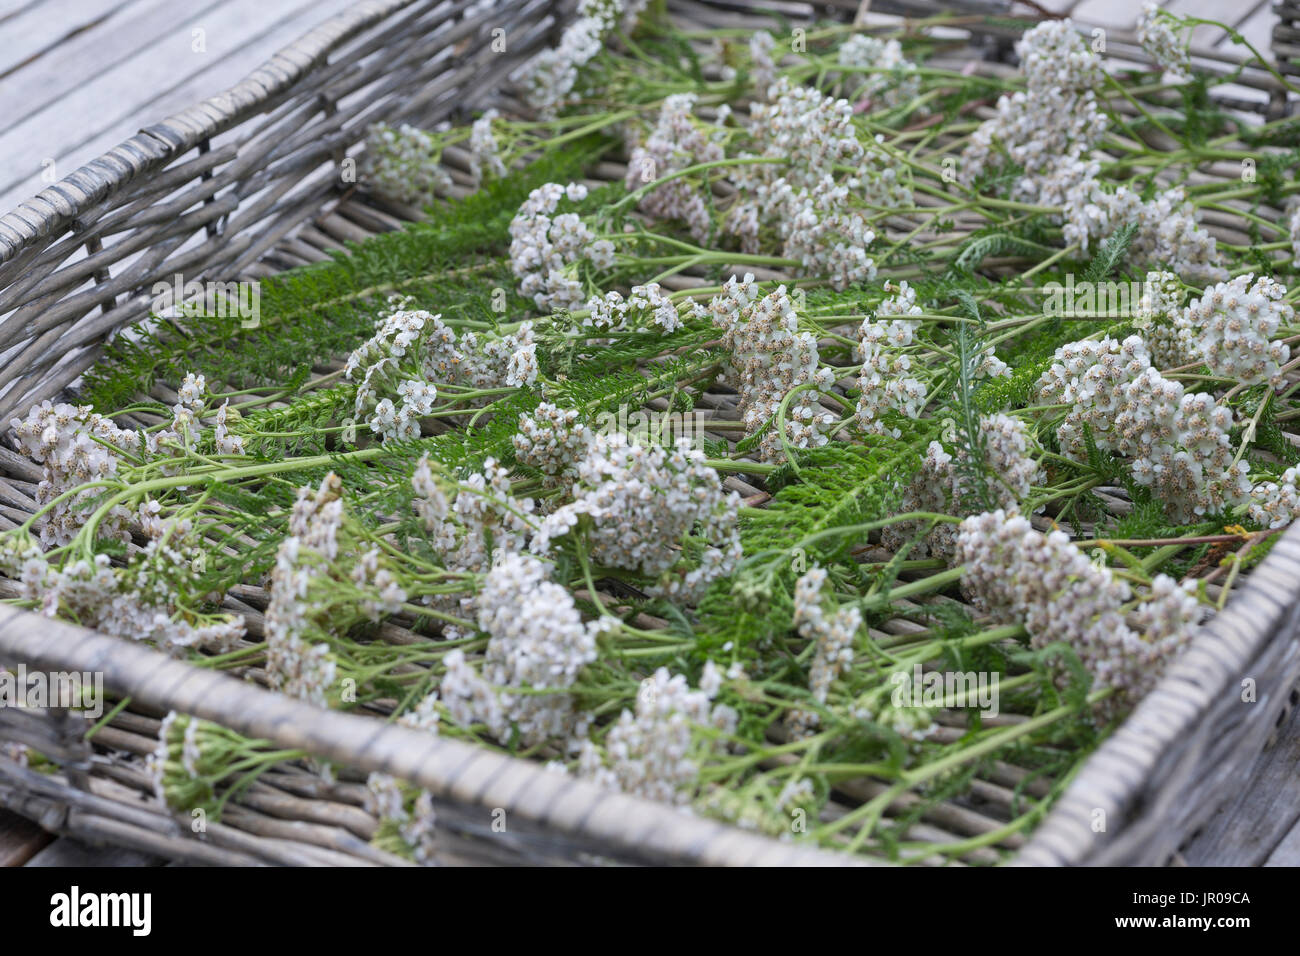 Page 2 - Kräuter Trocknen High Resolution Stock Photography and Images -  Alamy